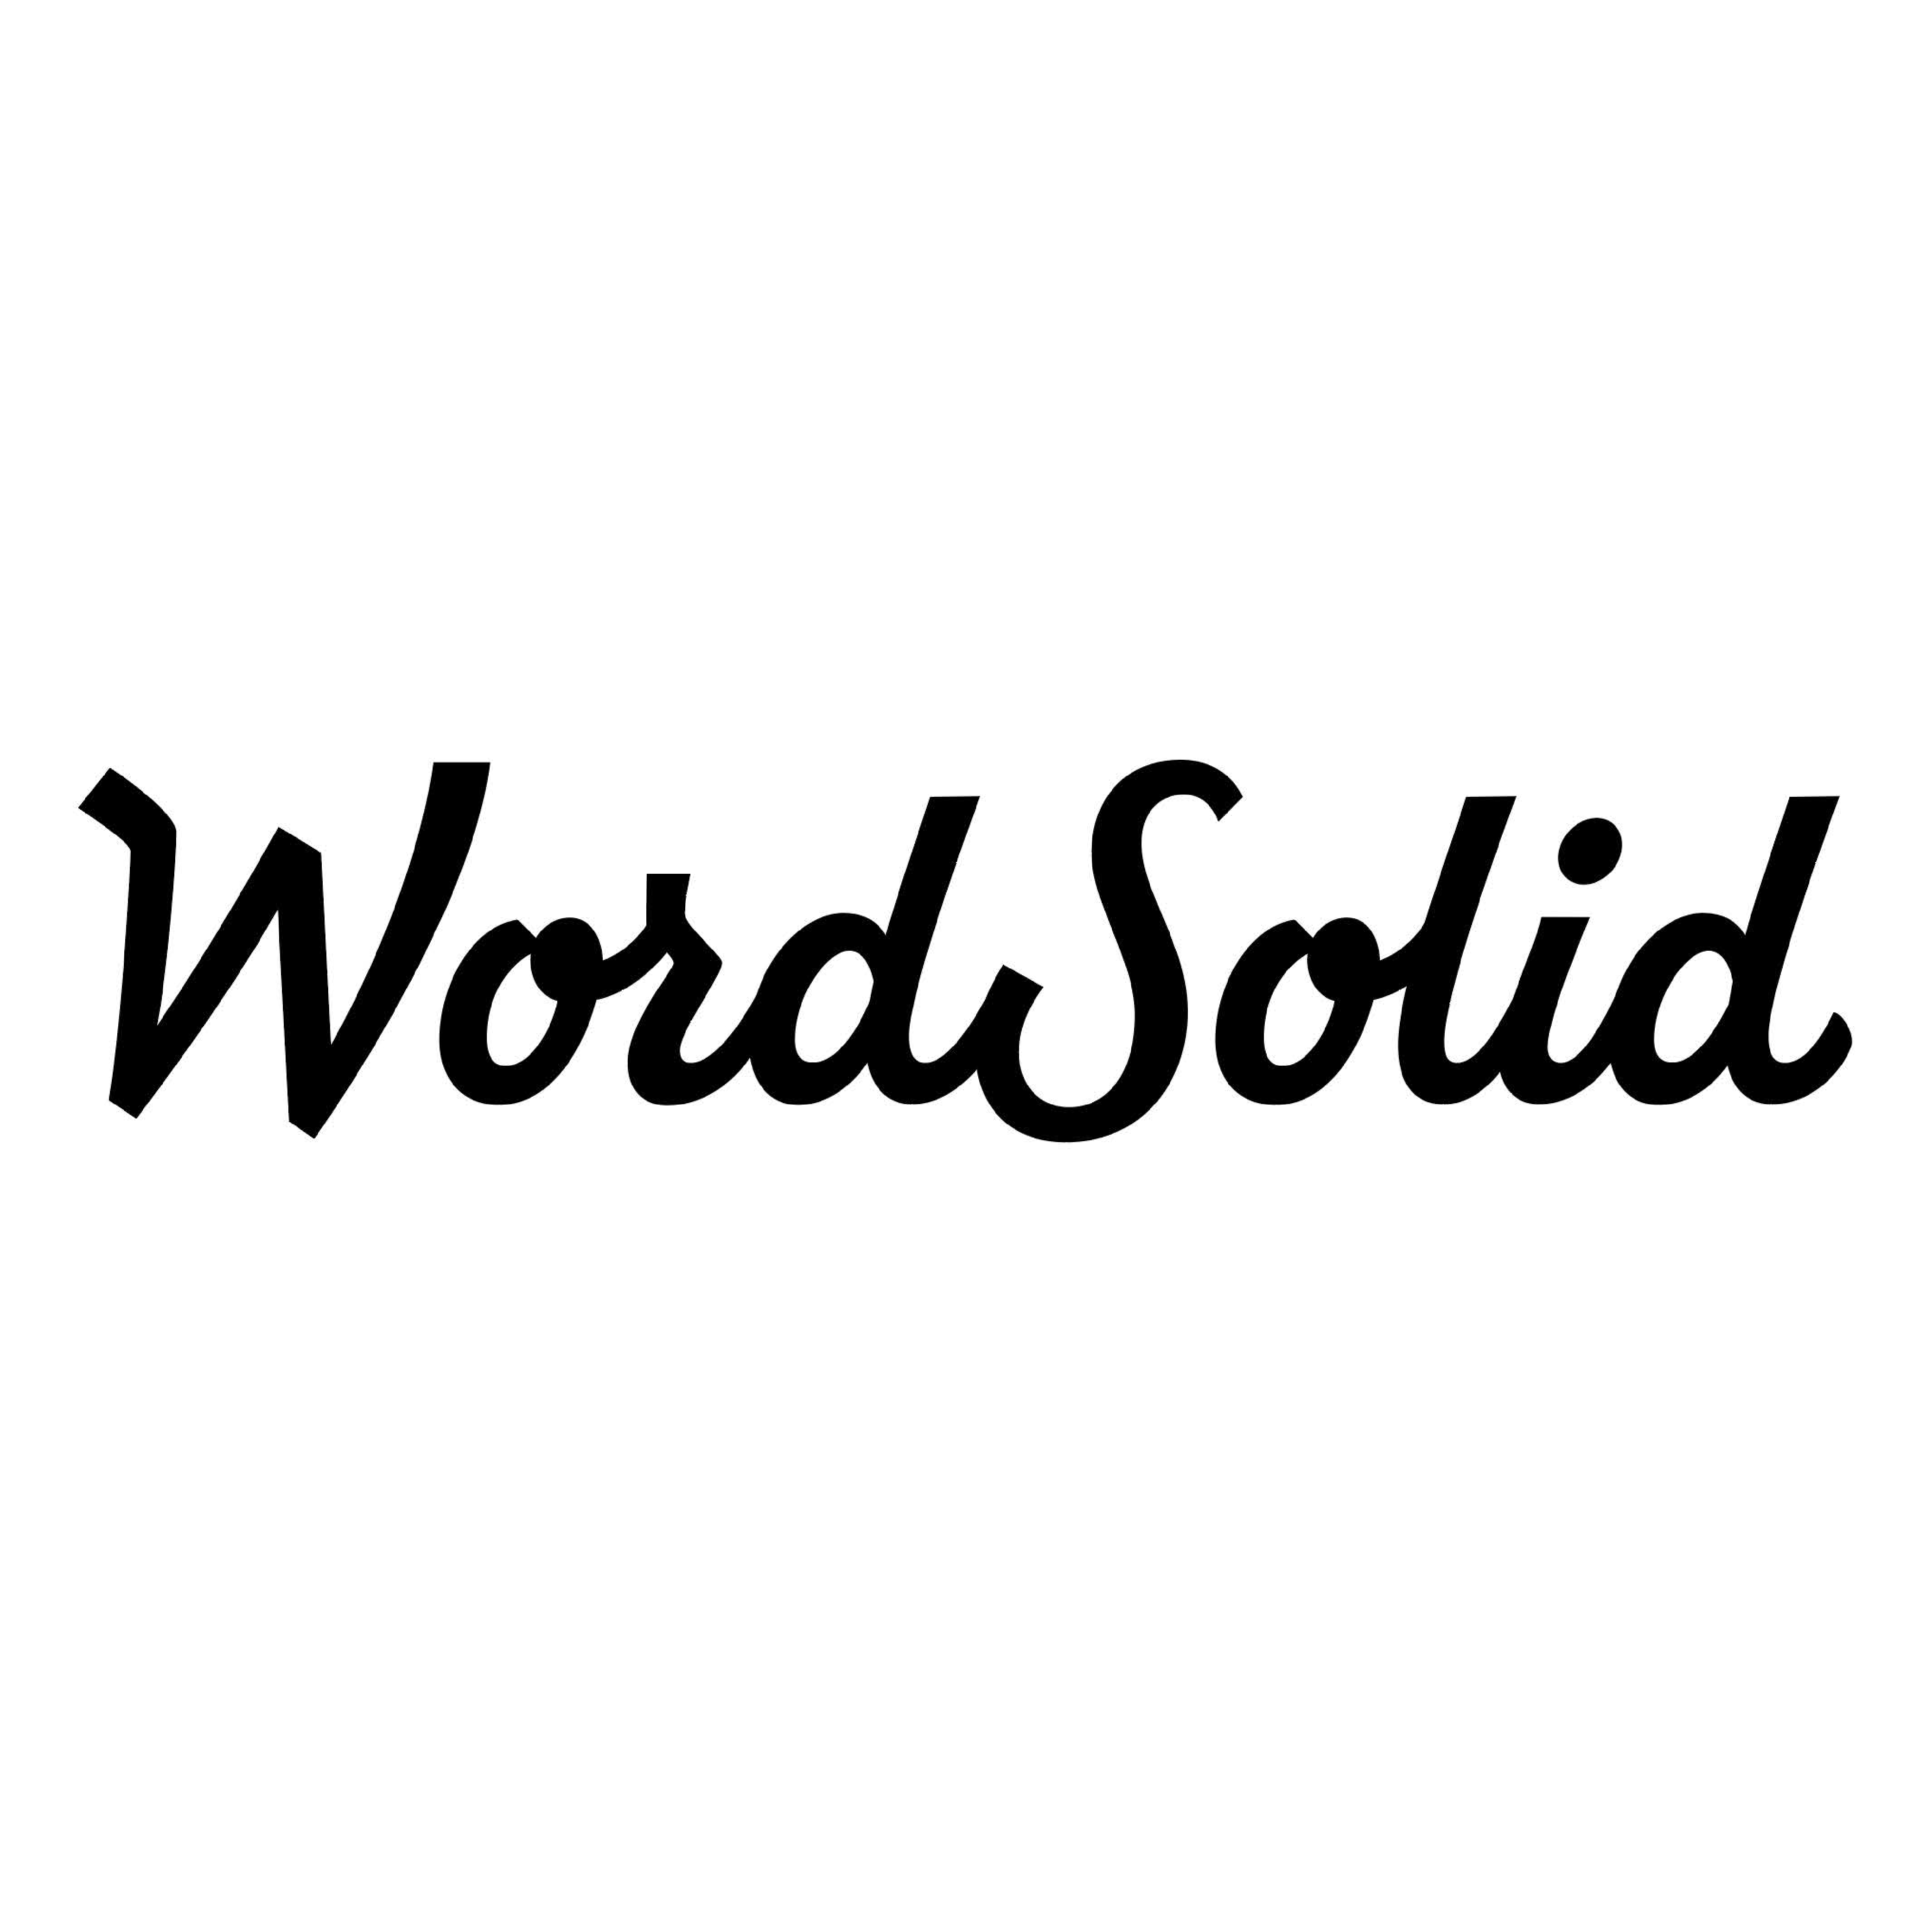 word solid logotype design by Martina Flor